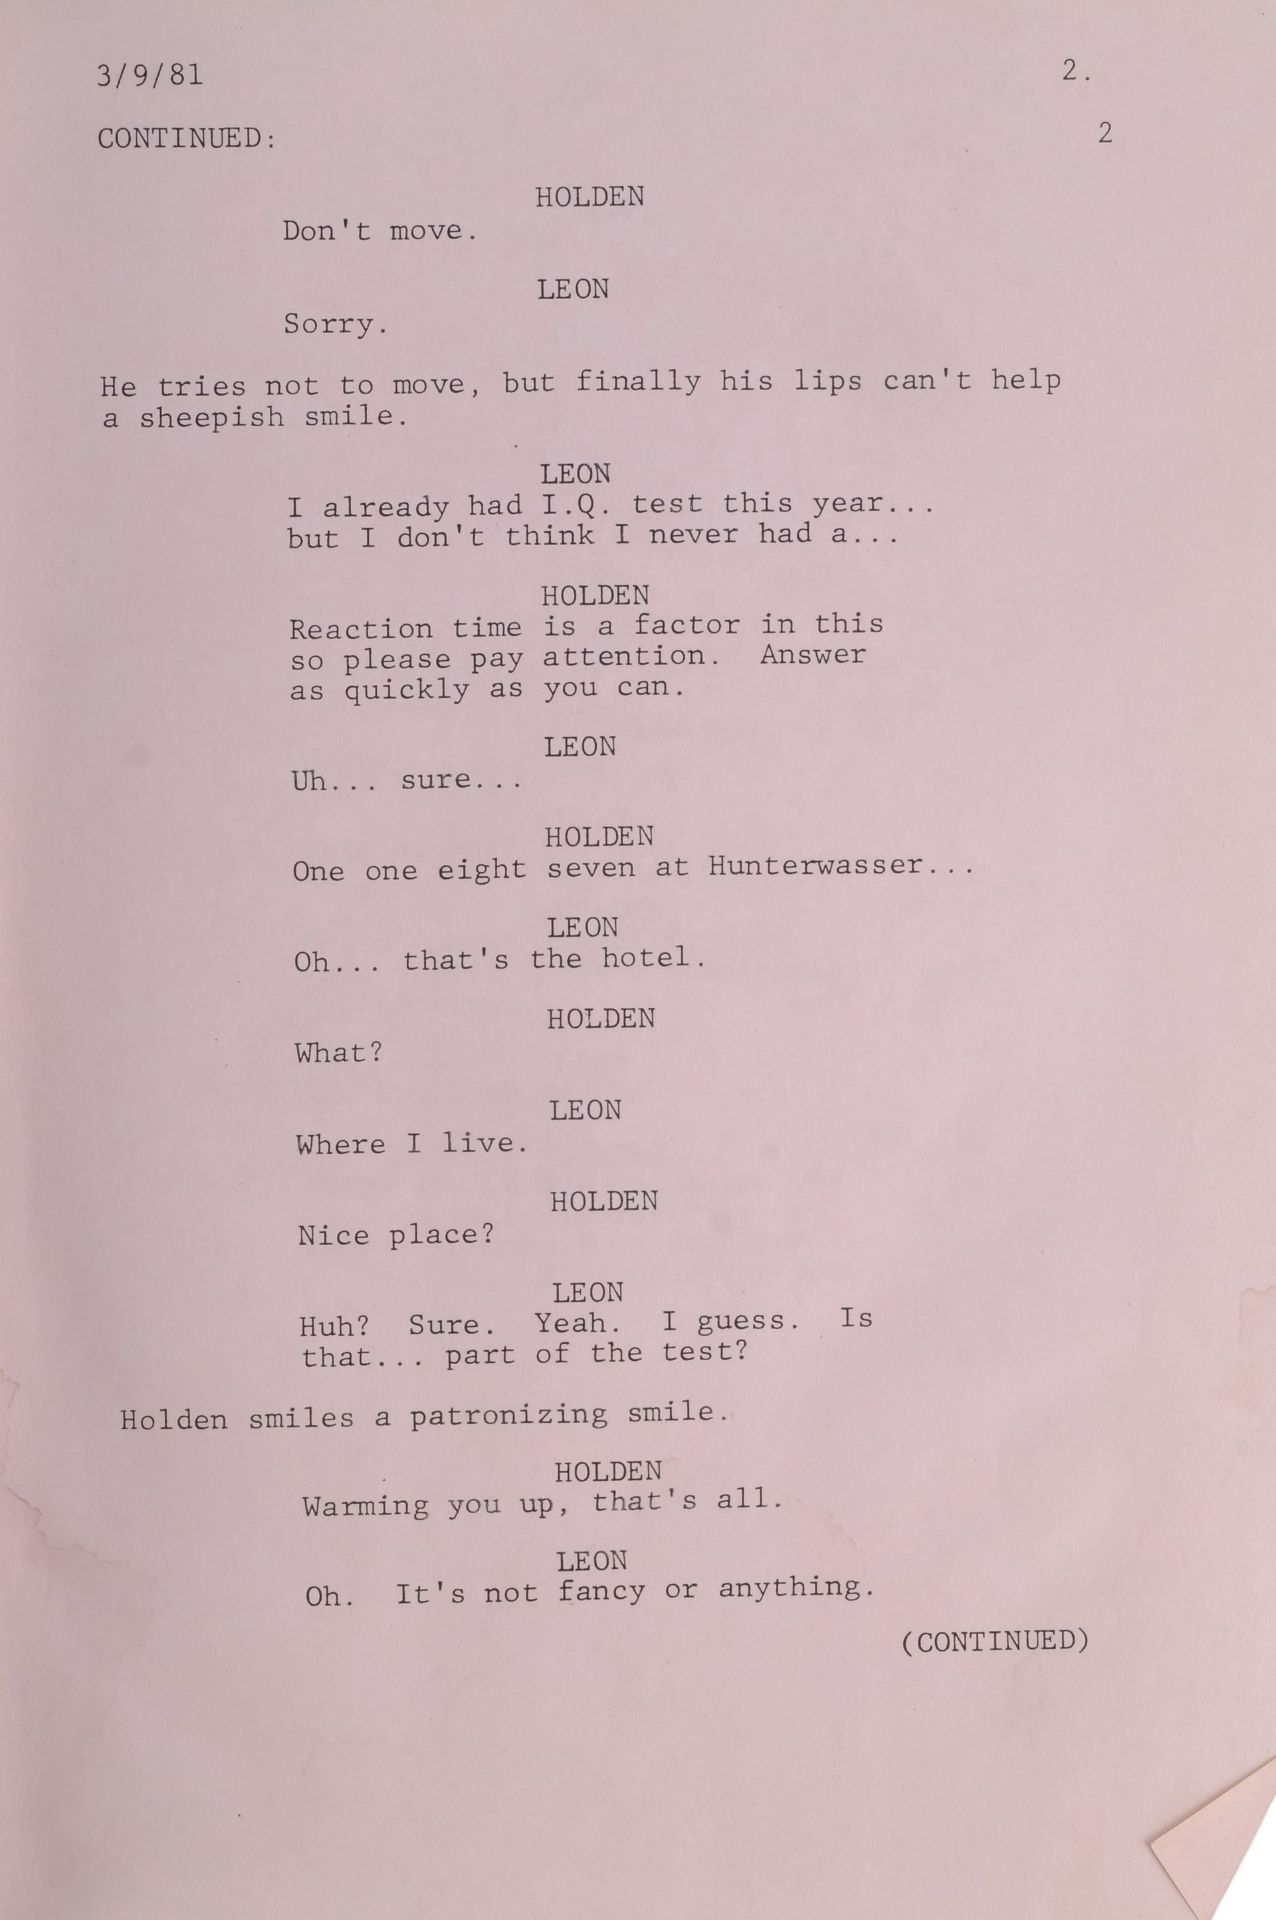 BLADE RUNNER (1982) - Producer's Assistant, Victoria Ewart's Personal Script - Image 4 of 8